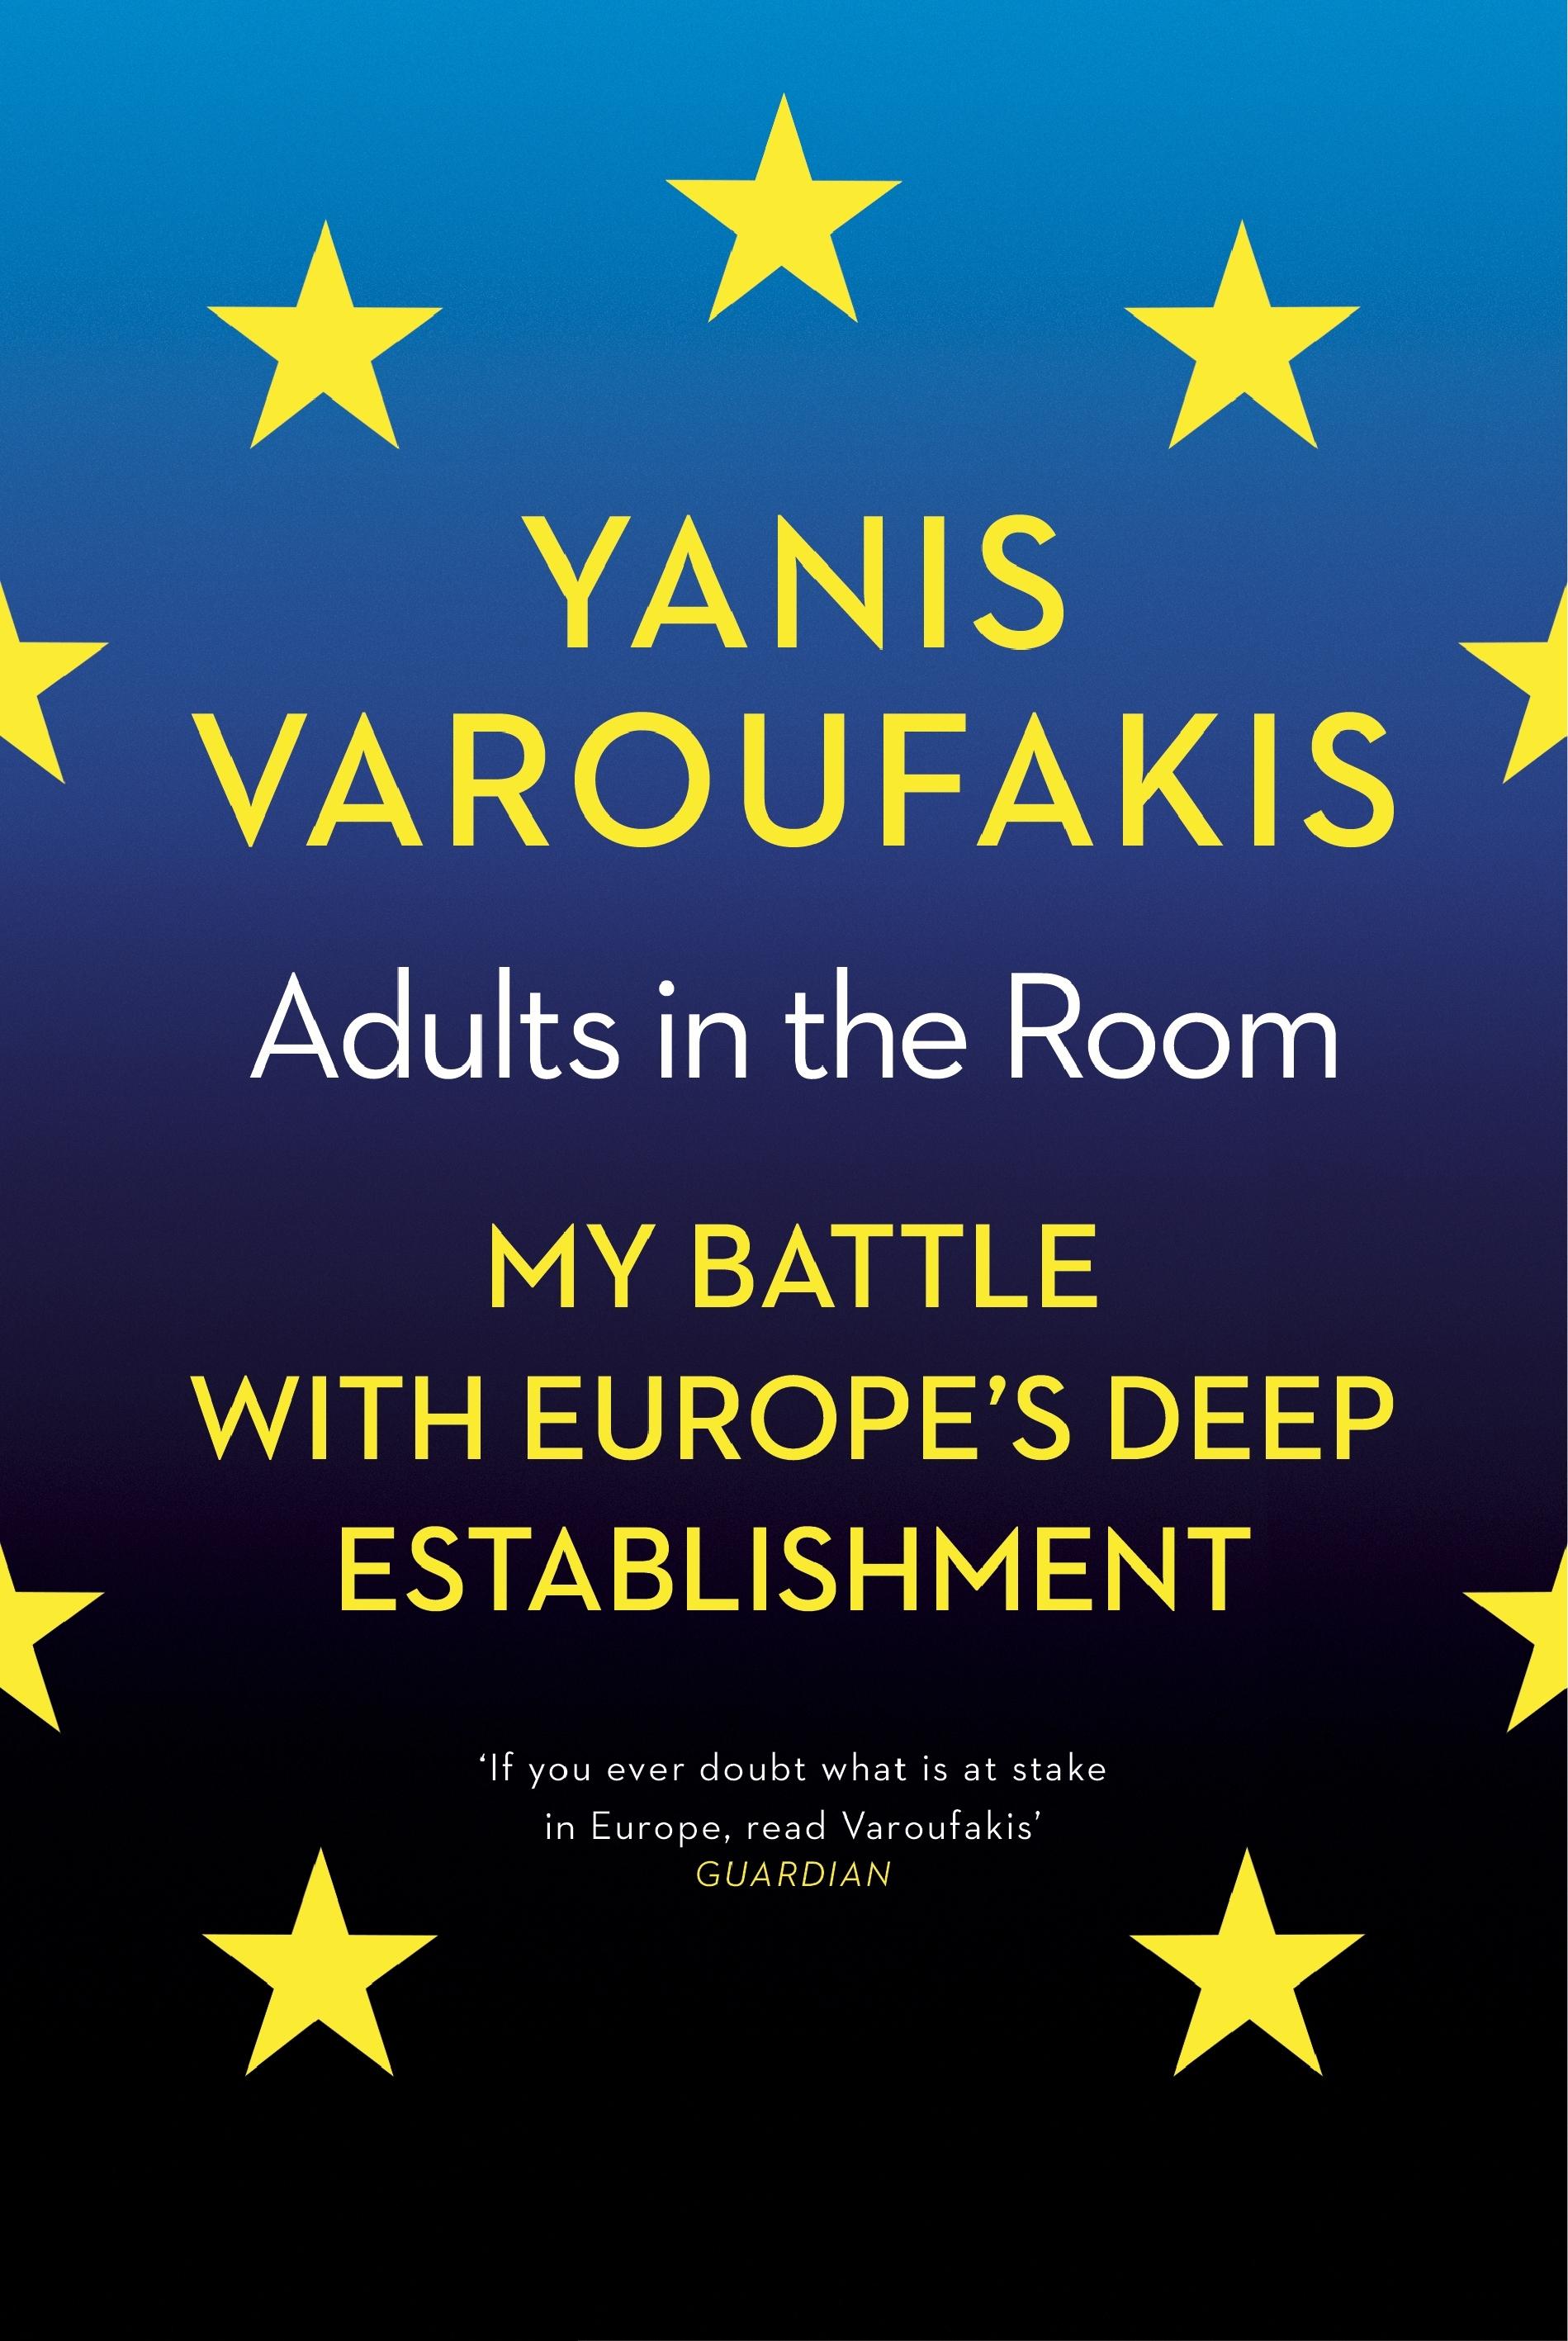 Adults in the Room "My Battle With Europes Deep Establishment "